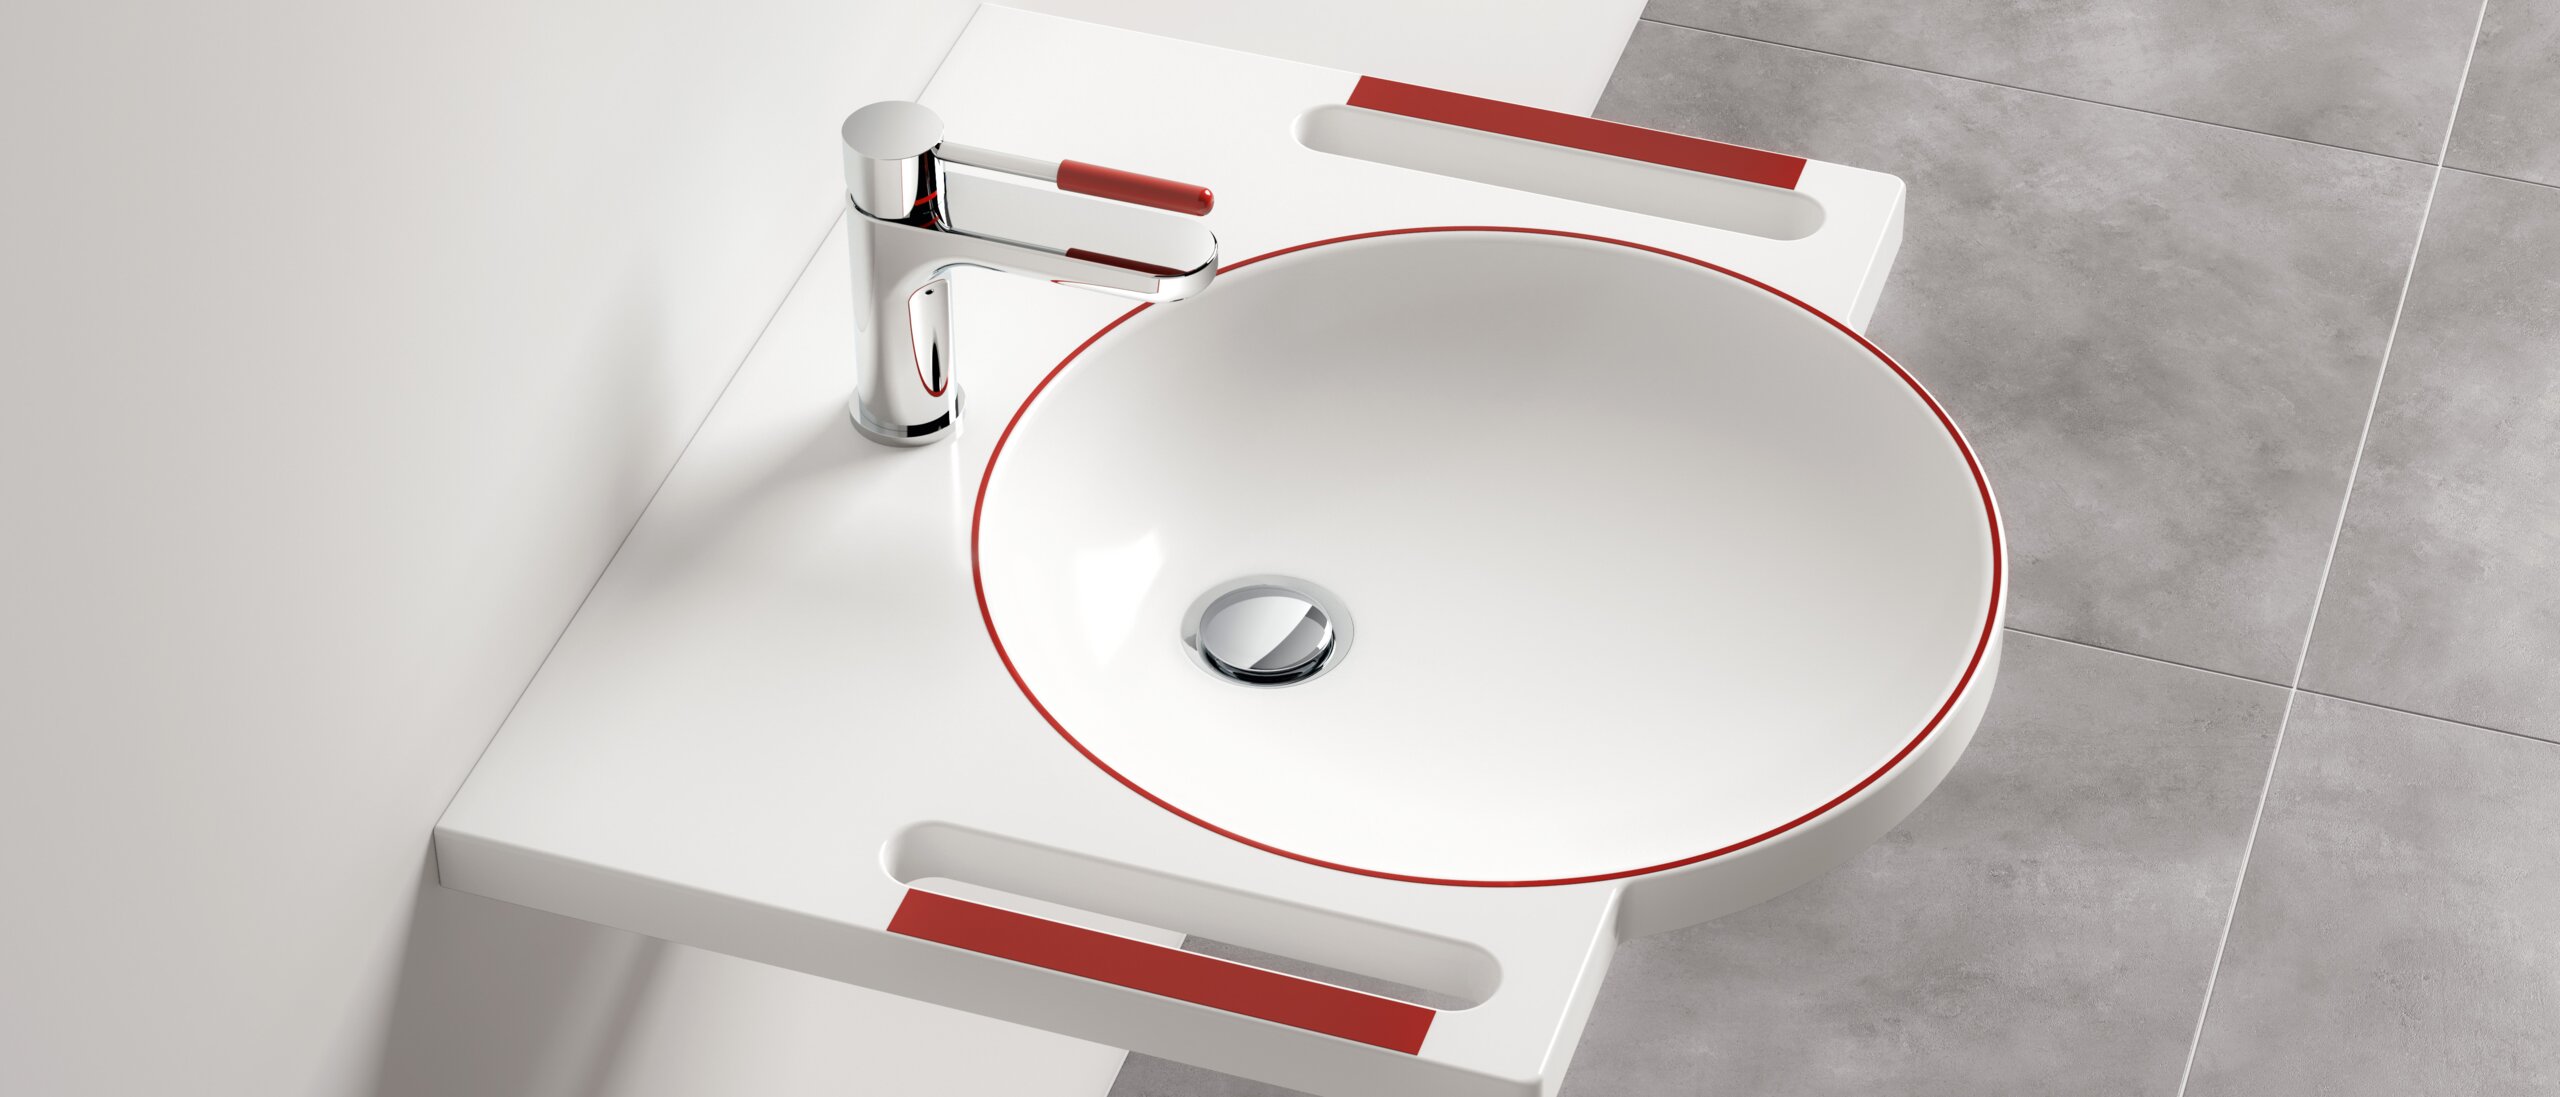 Washbasin and tap with red contrasting colours for dementia patients